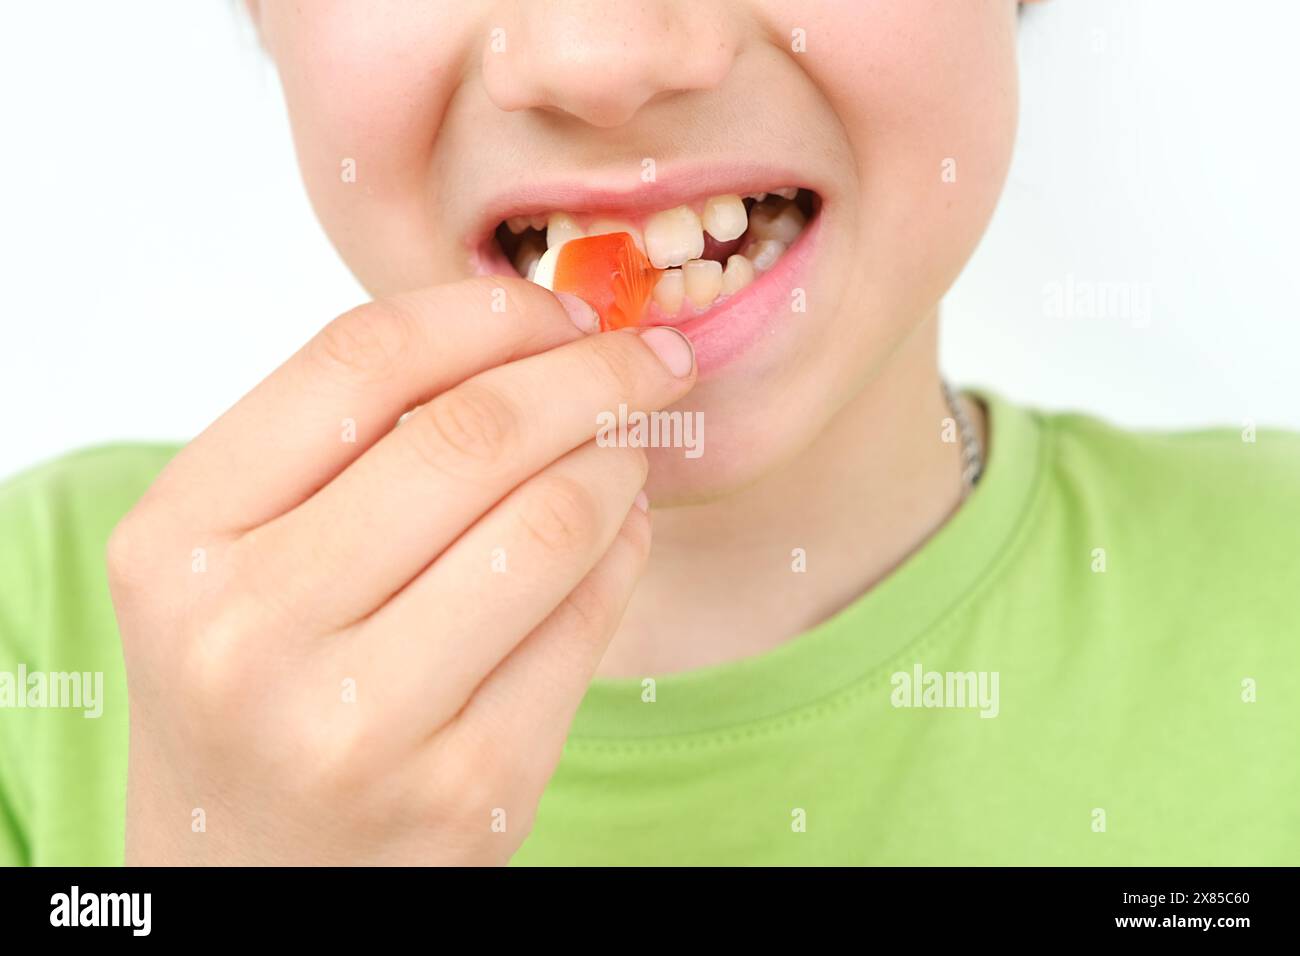 boy, child holds in his mouth and eats gelatinous sweets, gummy sweets, concept of children's delicacy, healthy and unhealthy food, halal food Stock Photo